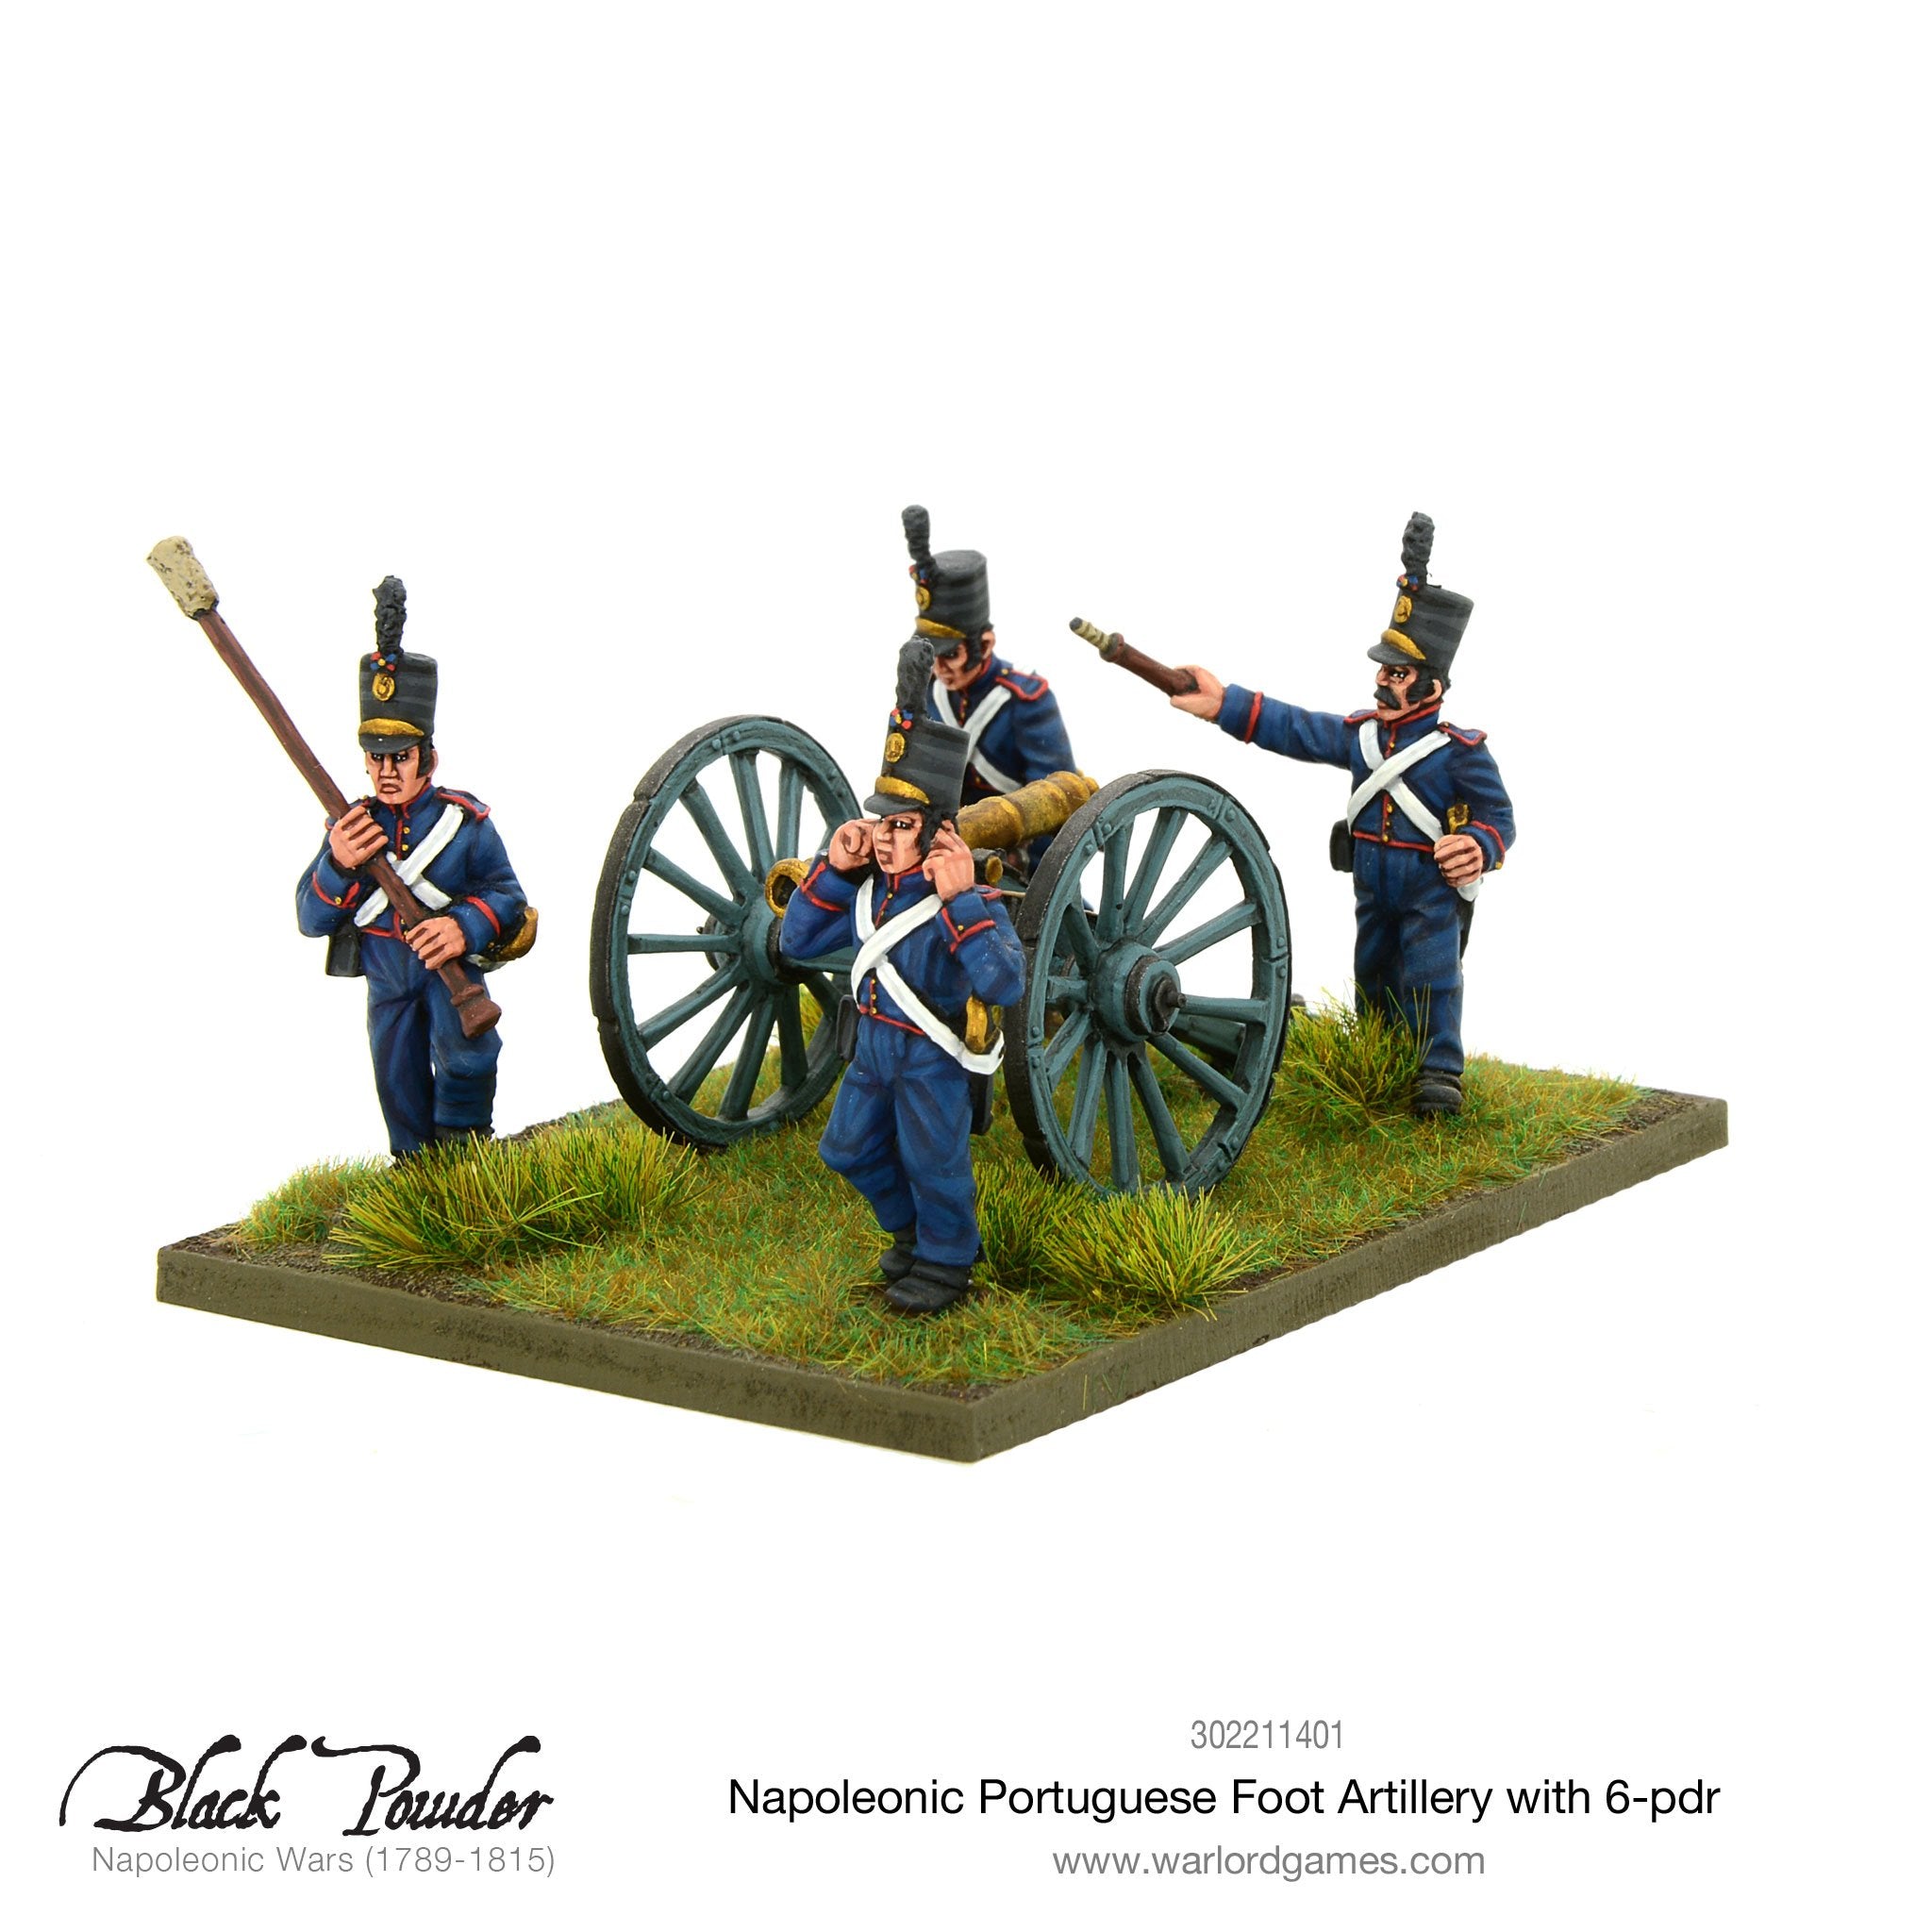 Napoleonic Portuguese Foot Artillery with 6-pdr